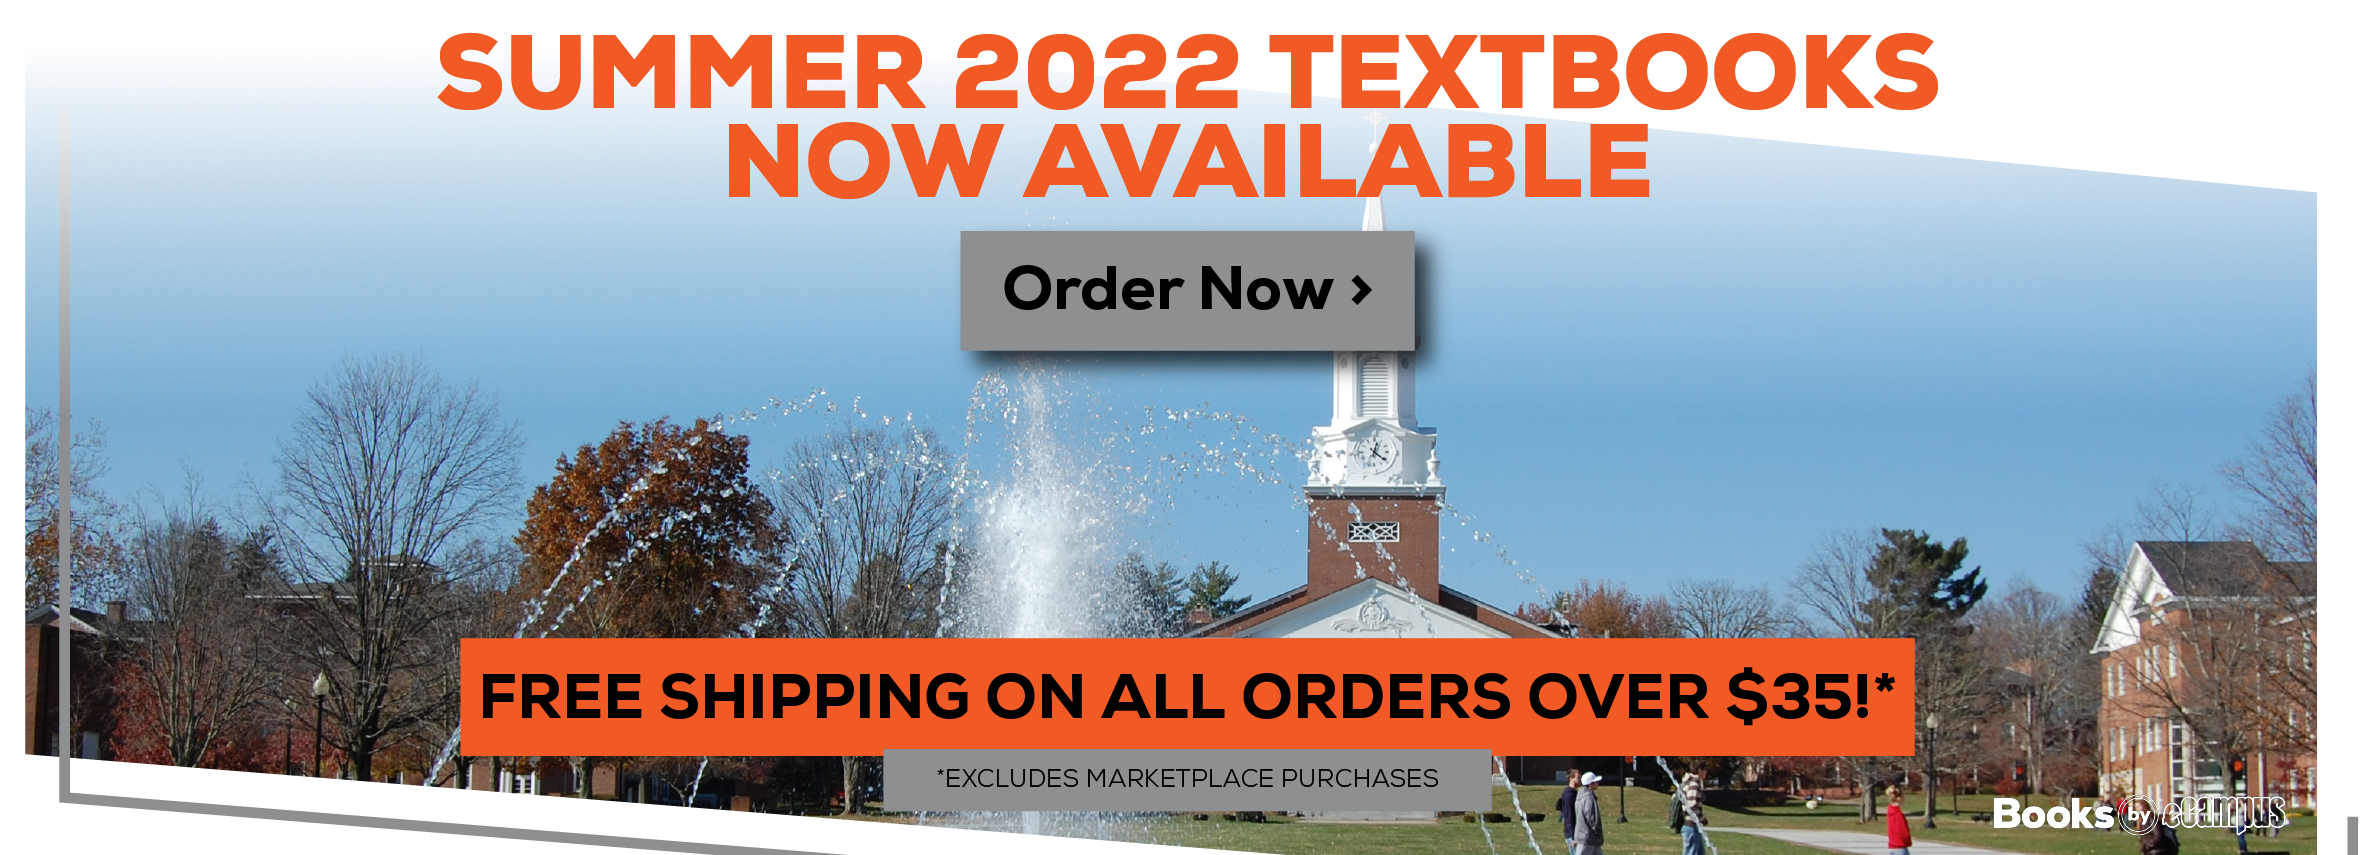 Summer 2022 Textbooks now available. Order now. Free shipping on orders over $35!